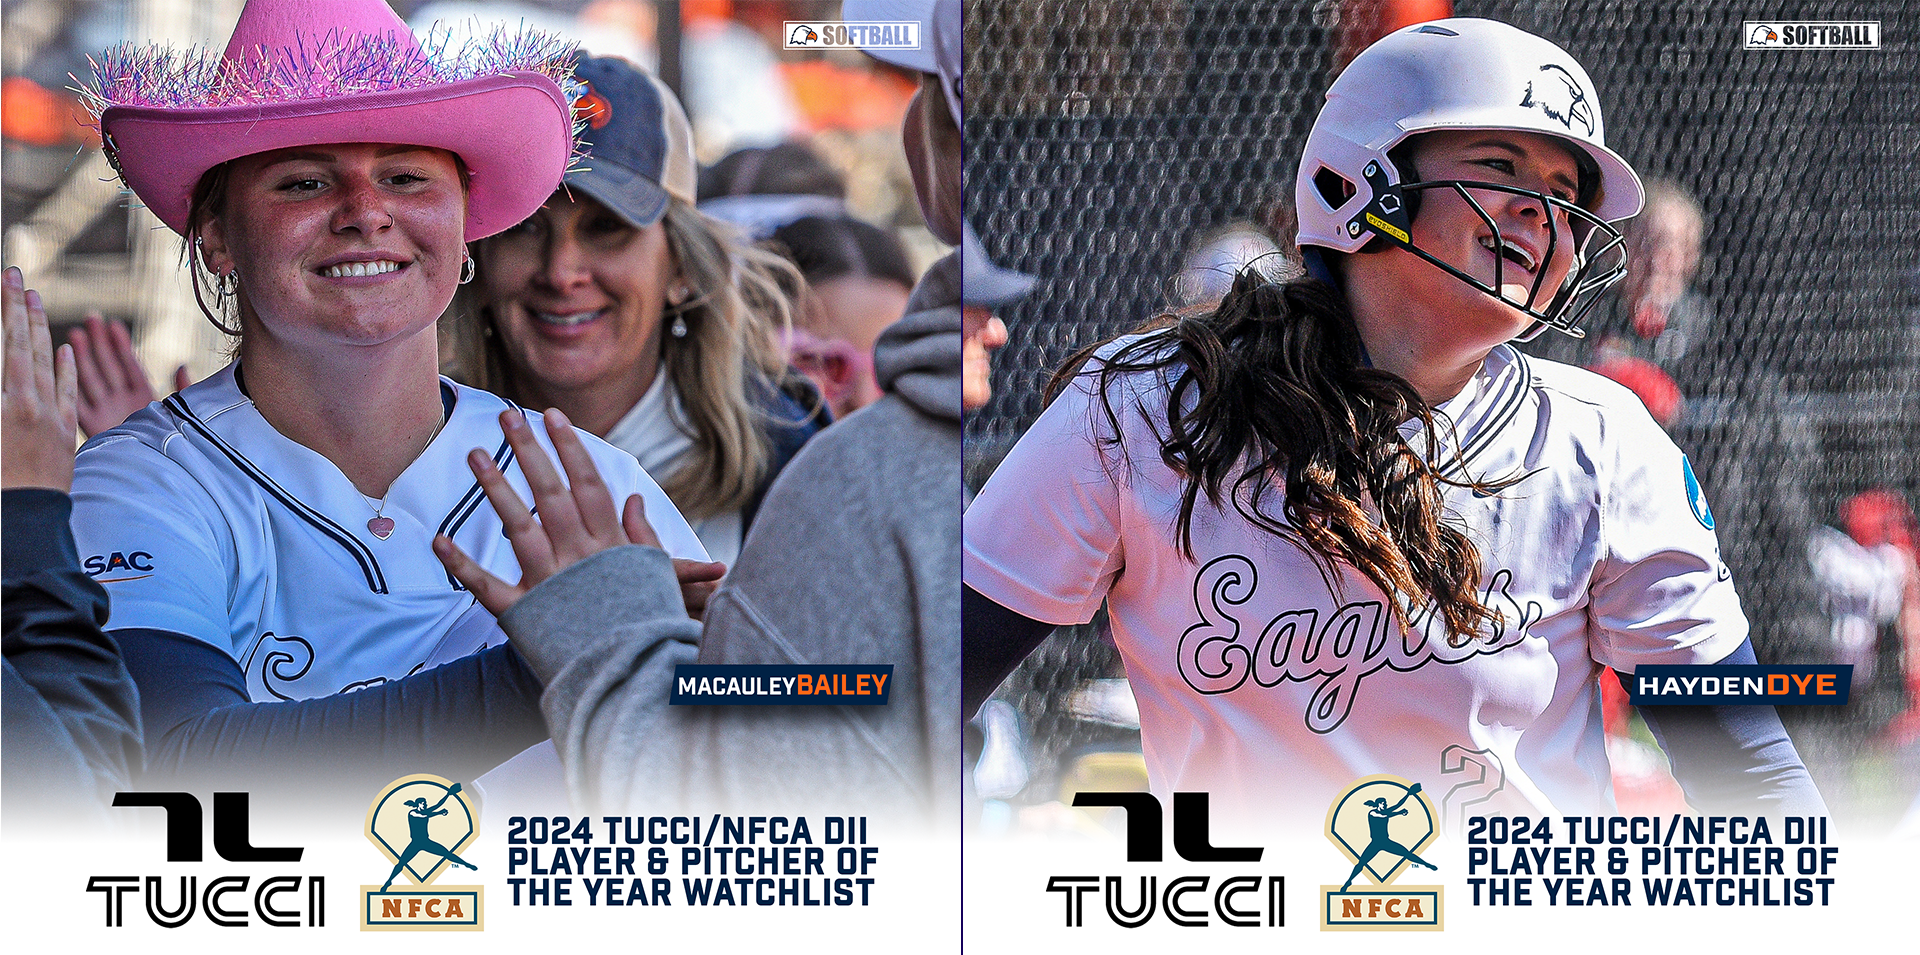 Dye, Bailey named to NFCA D2 Player/Pitcher of the Year Watchlist